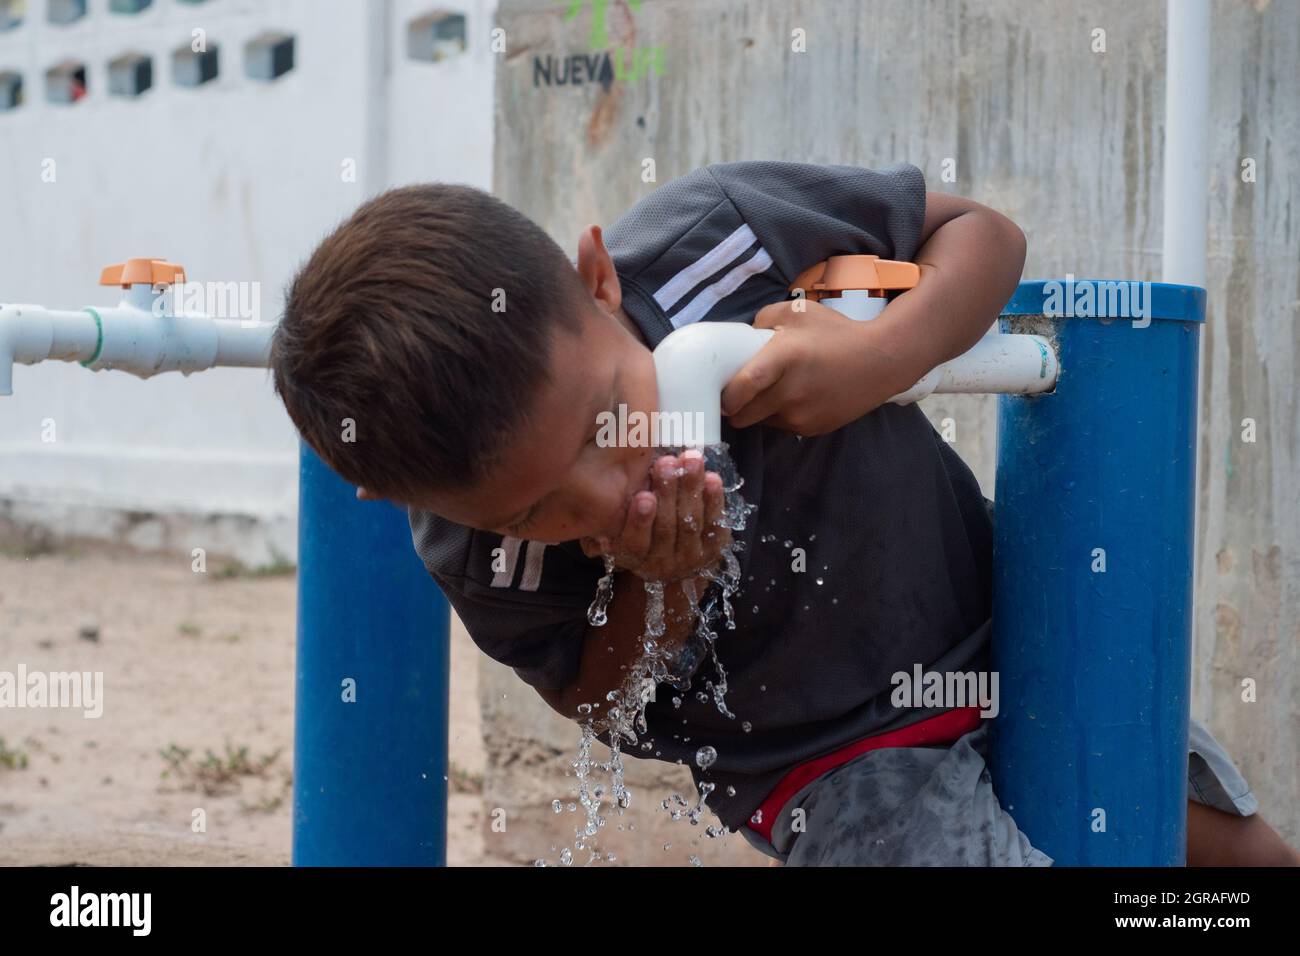 Mayapo, Colombia. 26th Sep, 2021. A kid from the Wayuu indigenous community drinks water from a pump during a Humanitarian Mission developed by 'De Corazon Guajira' in Mayapo at La Guajira - Colombia were they visited the Wayuu indigenous communities 'Pactalia, Poromana, Perrohuila' on September 26, 2021. The Guajira region in Colombia is the poorest region in Colombia, with its people commongly living without drinkable water, electricity and food. Credit: Long Visual Press/Alamy Live News Stock Photo